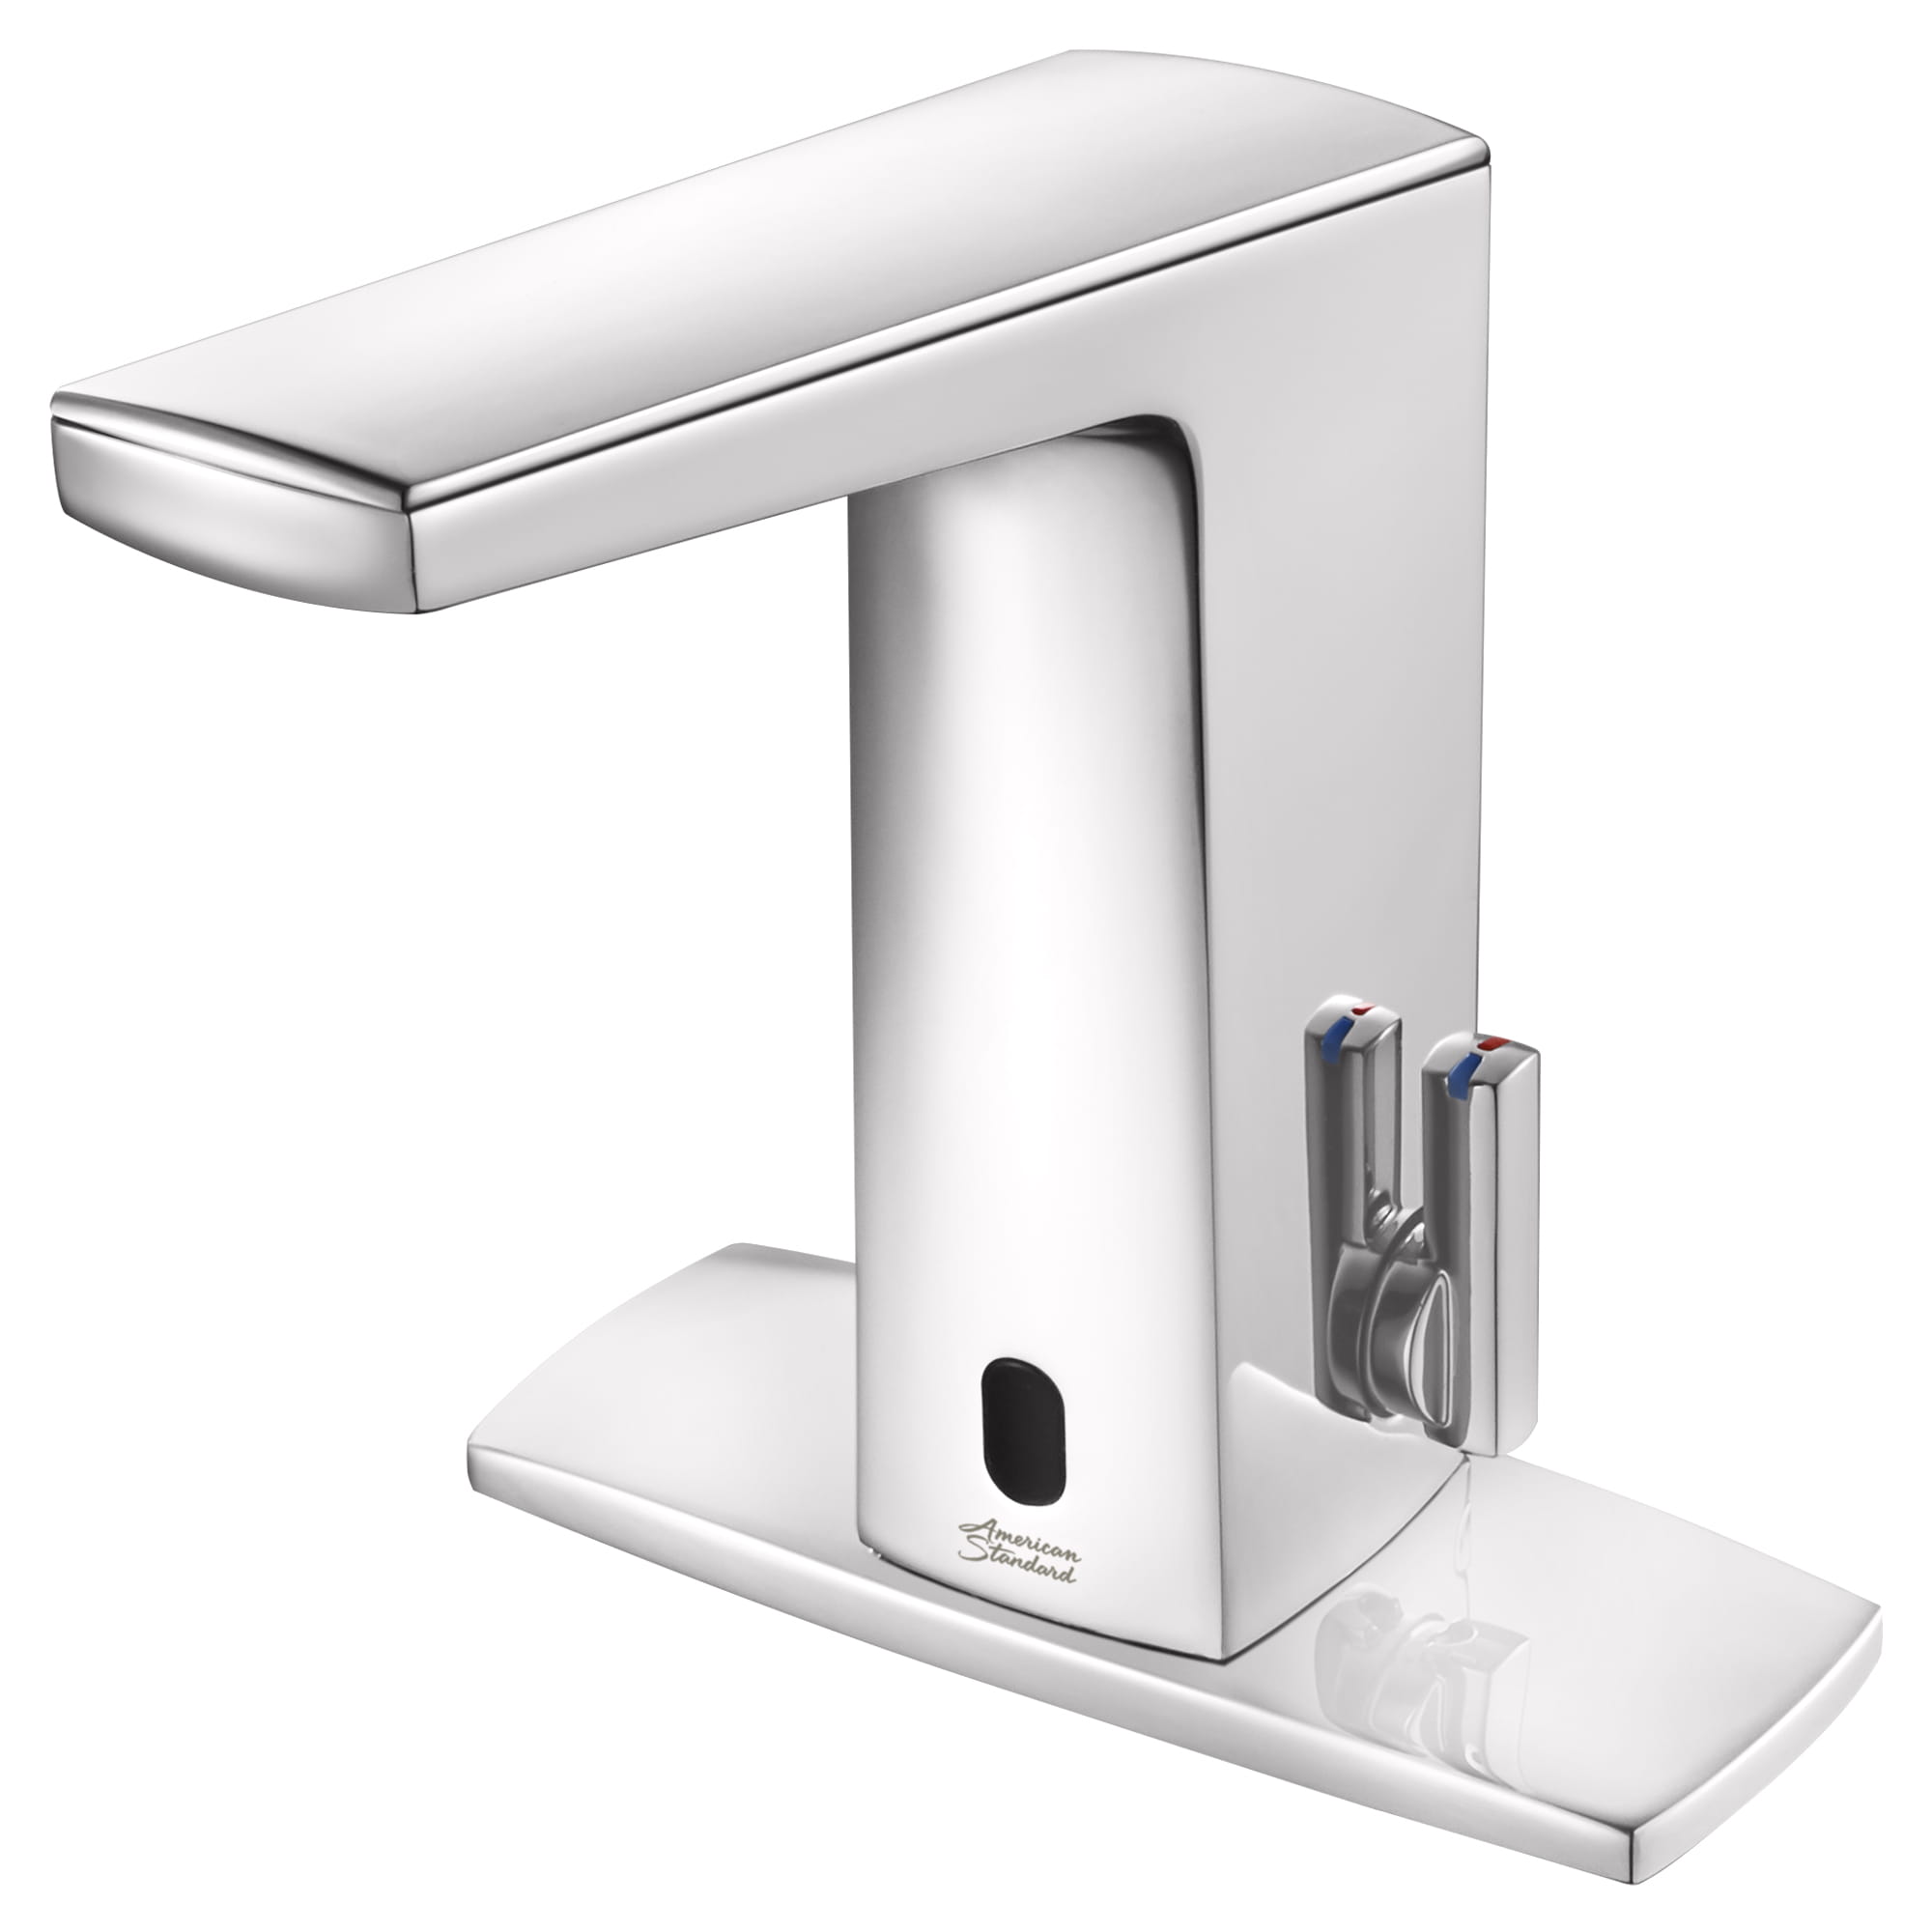 Paradigm® Selectronic® Touchless Faucet, Base Model With Above-Deck Mixing, 0.35 gpm/1.3 Lpm